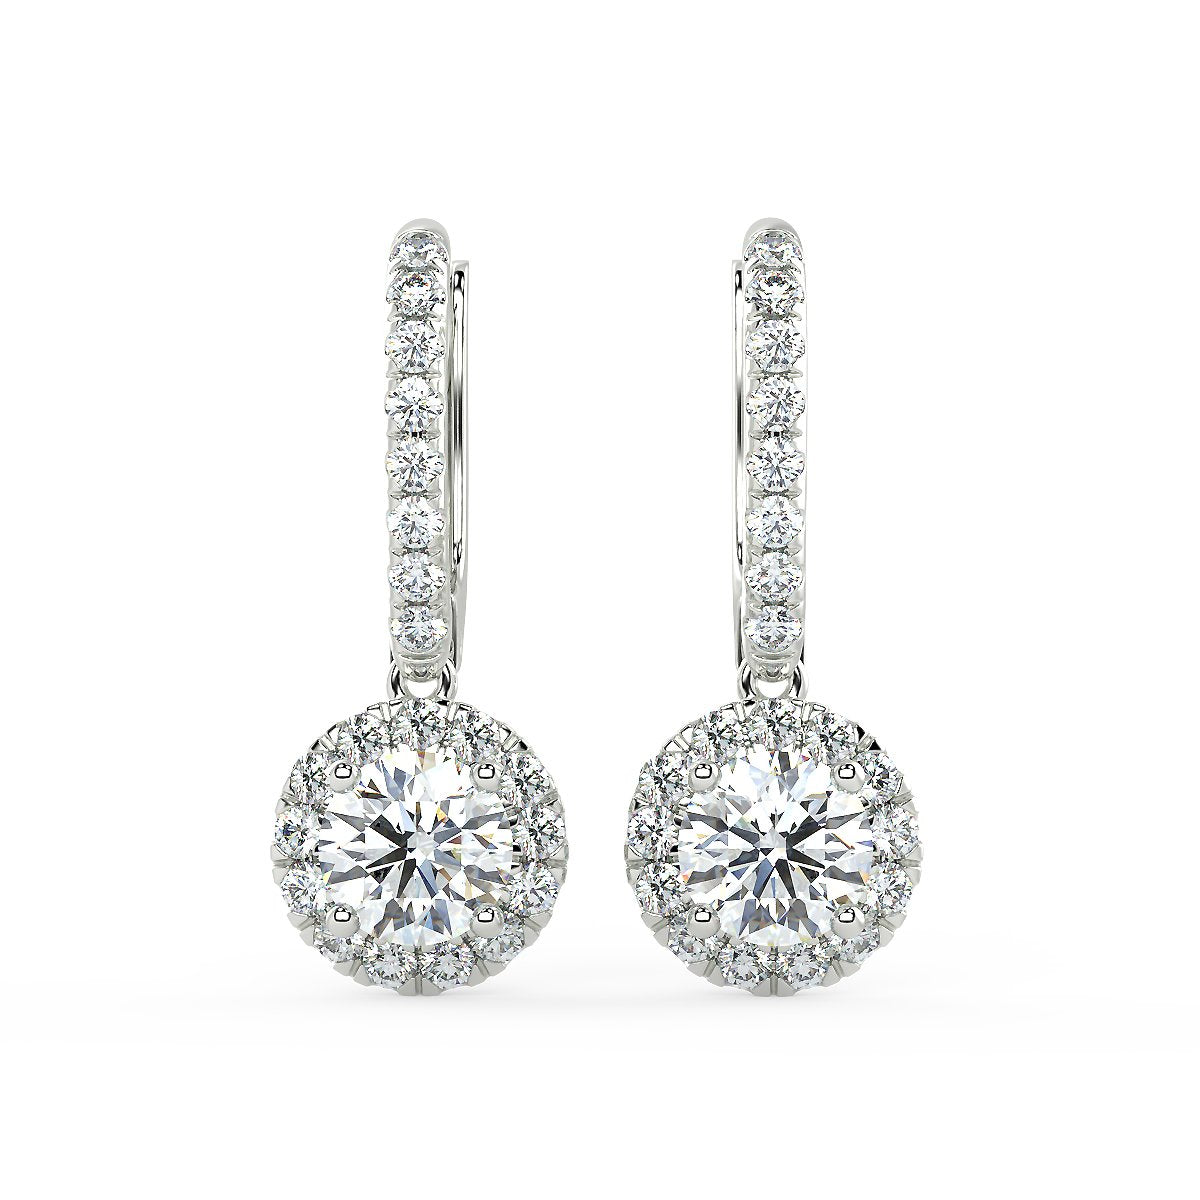 Cassiopeia White Gold Drop Earrings (1.70 Ct. Tw.)